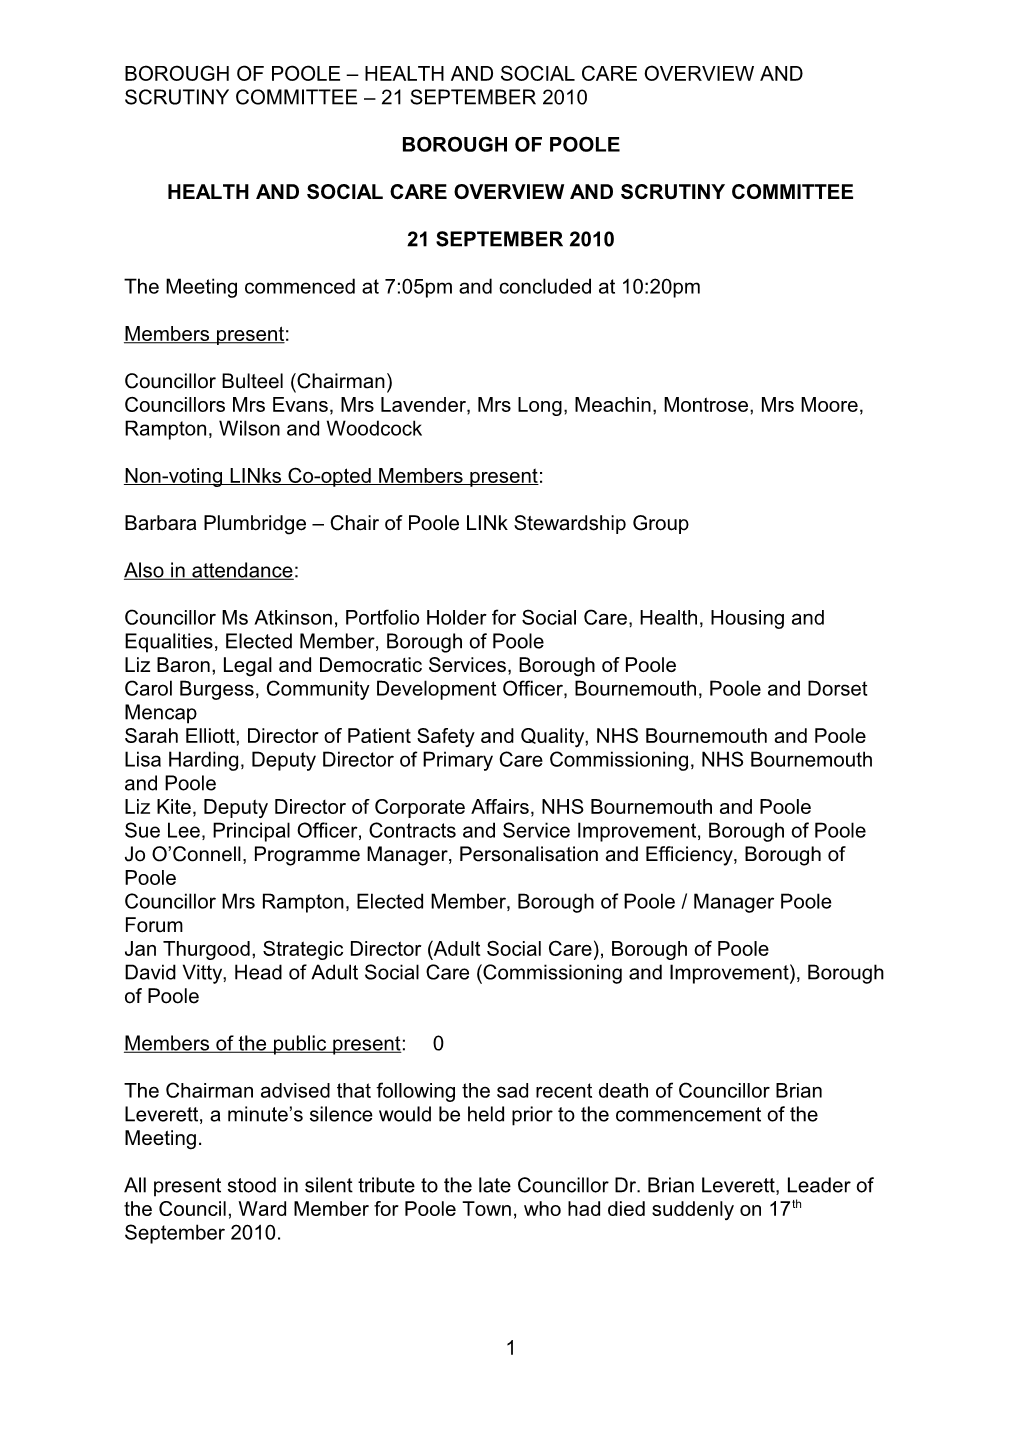 Minutes - Health and Social Care Overview and Scrutiny Committee - 21 September 2010